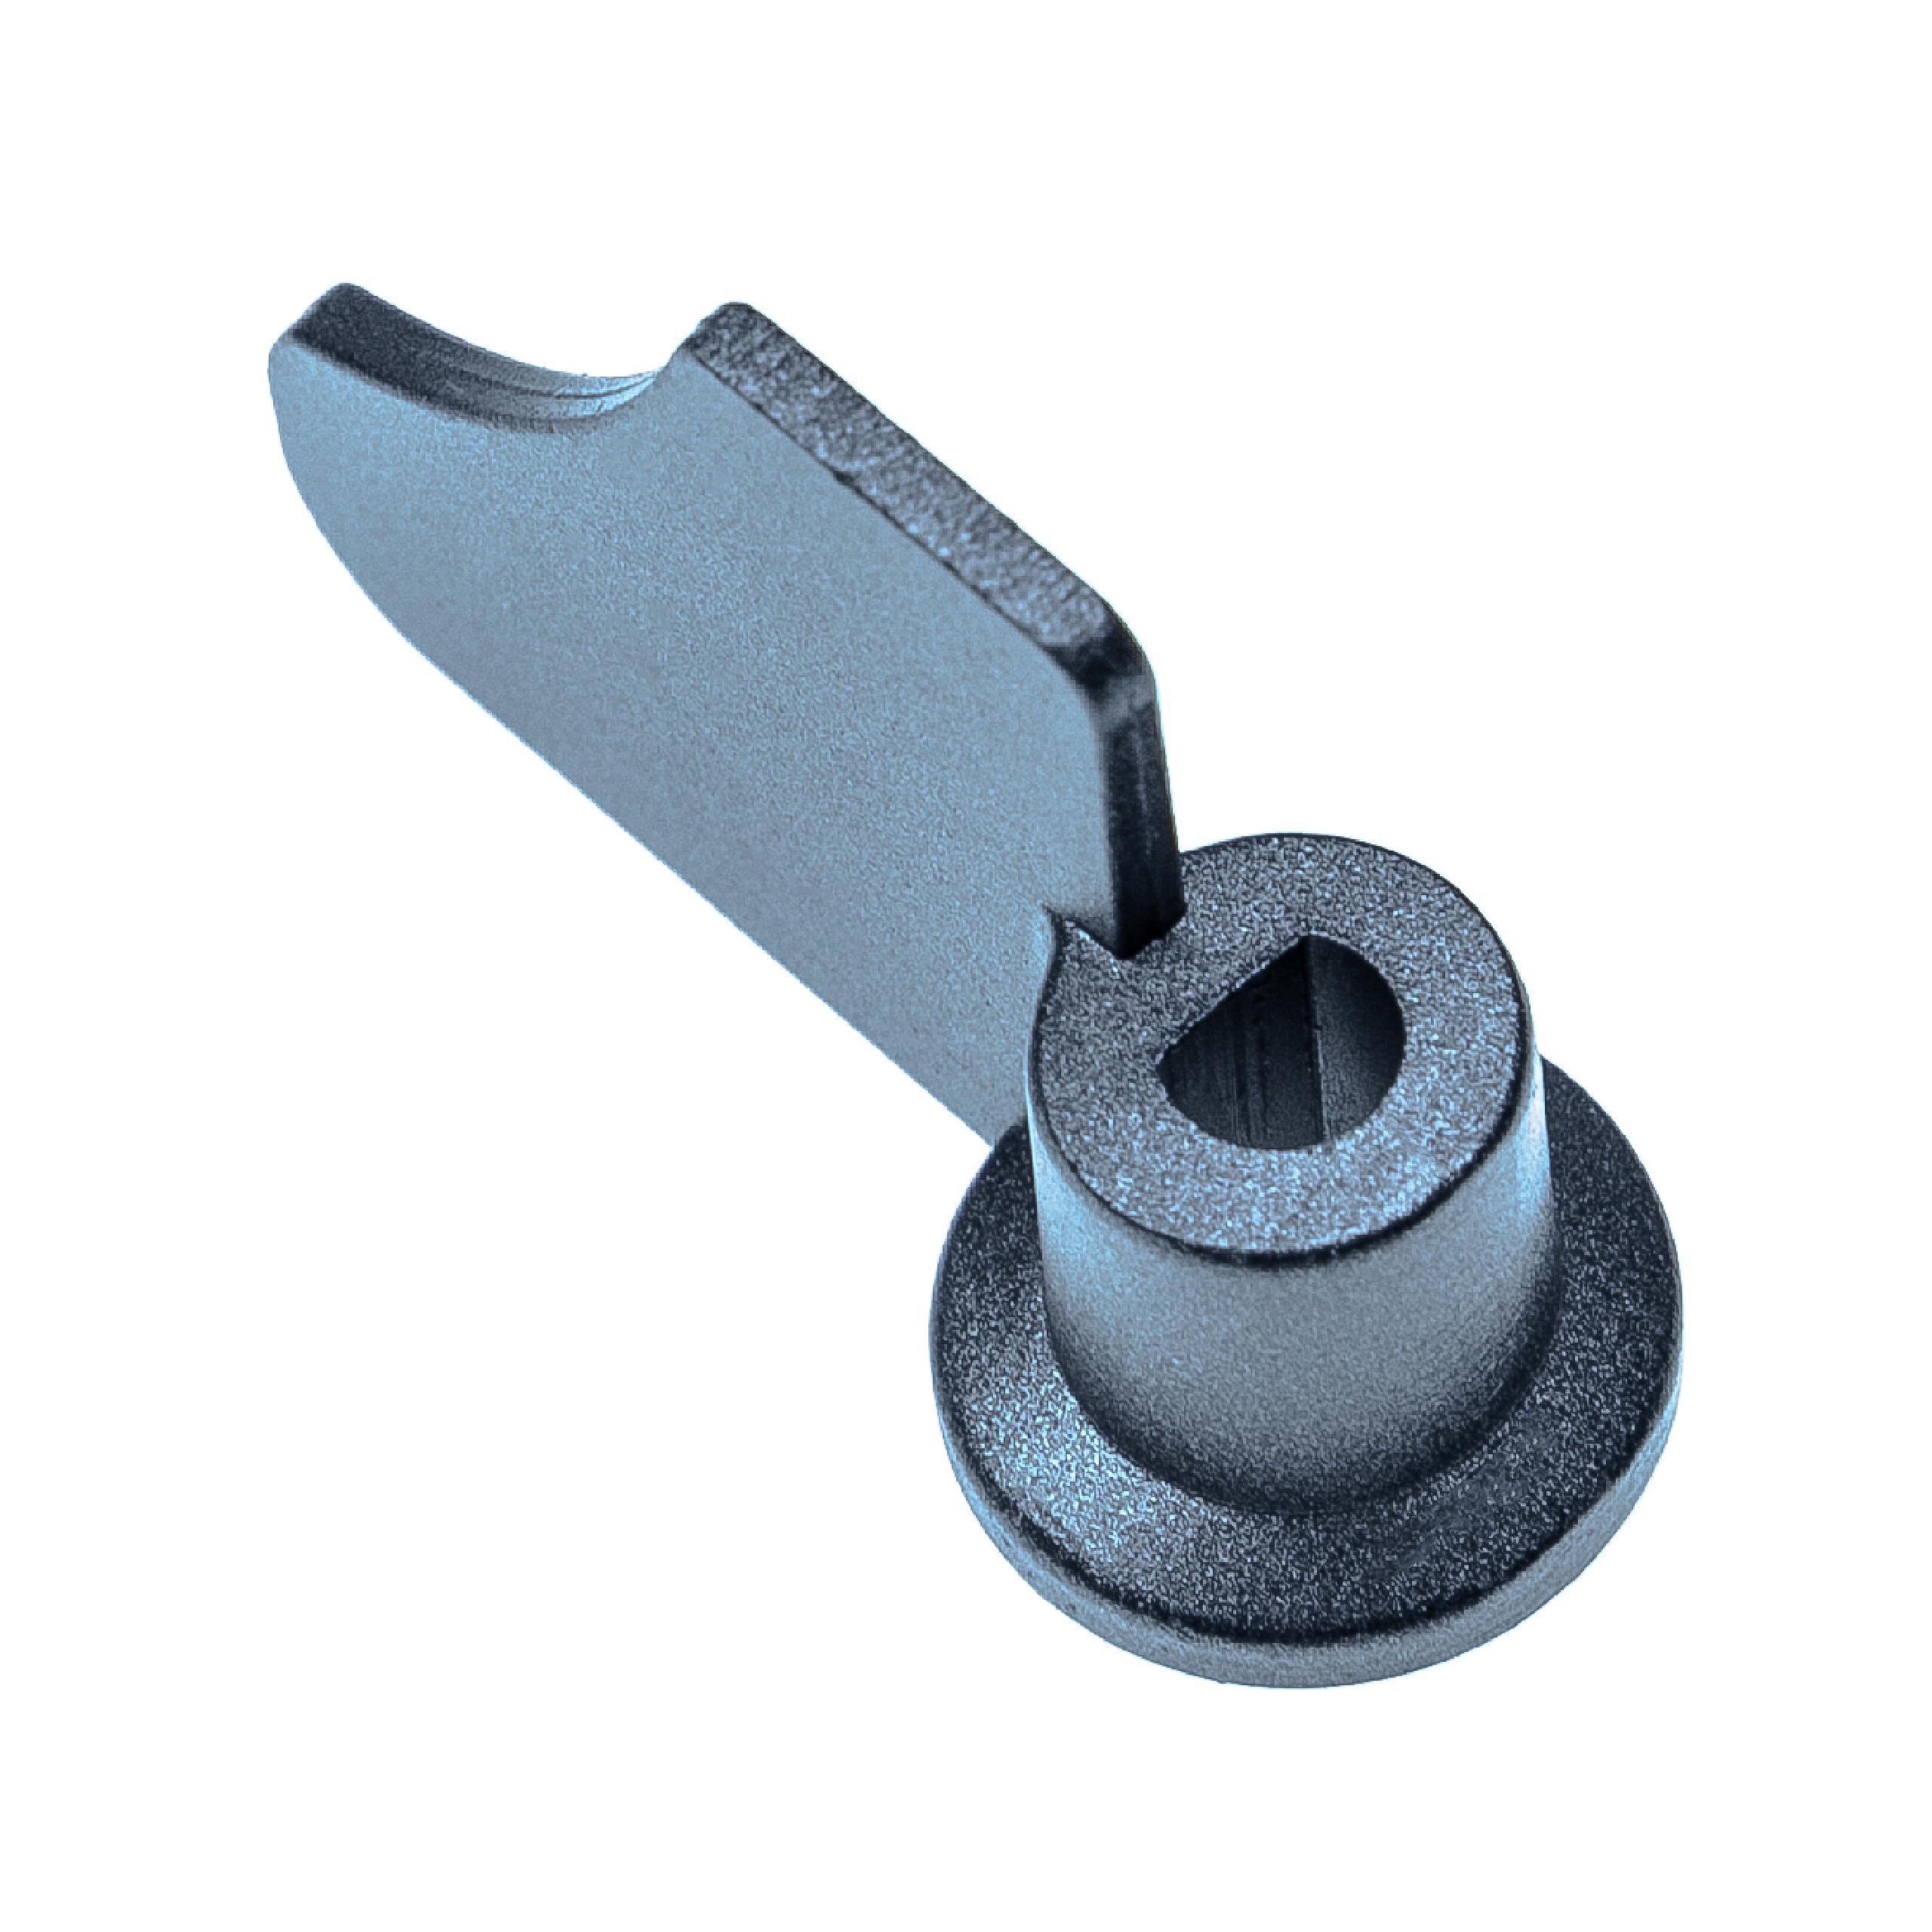 Dough Hook Replacement for SS-185951 for Bread-Maker - Mixing Paddle, grey